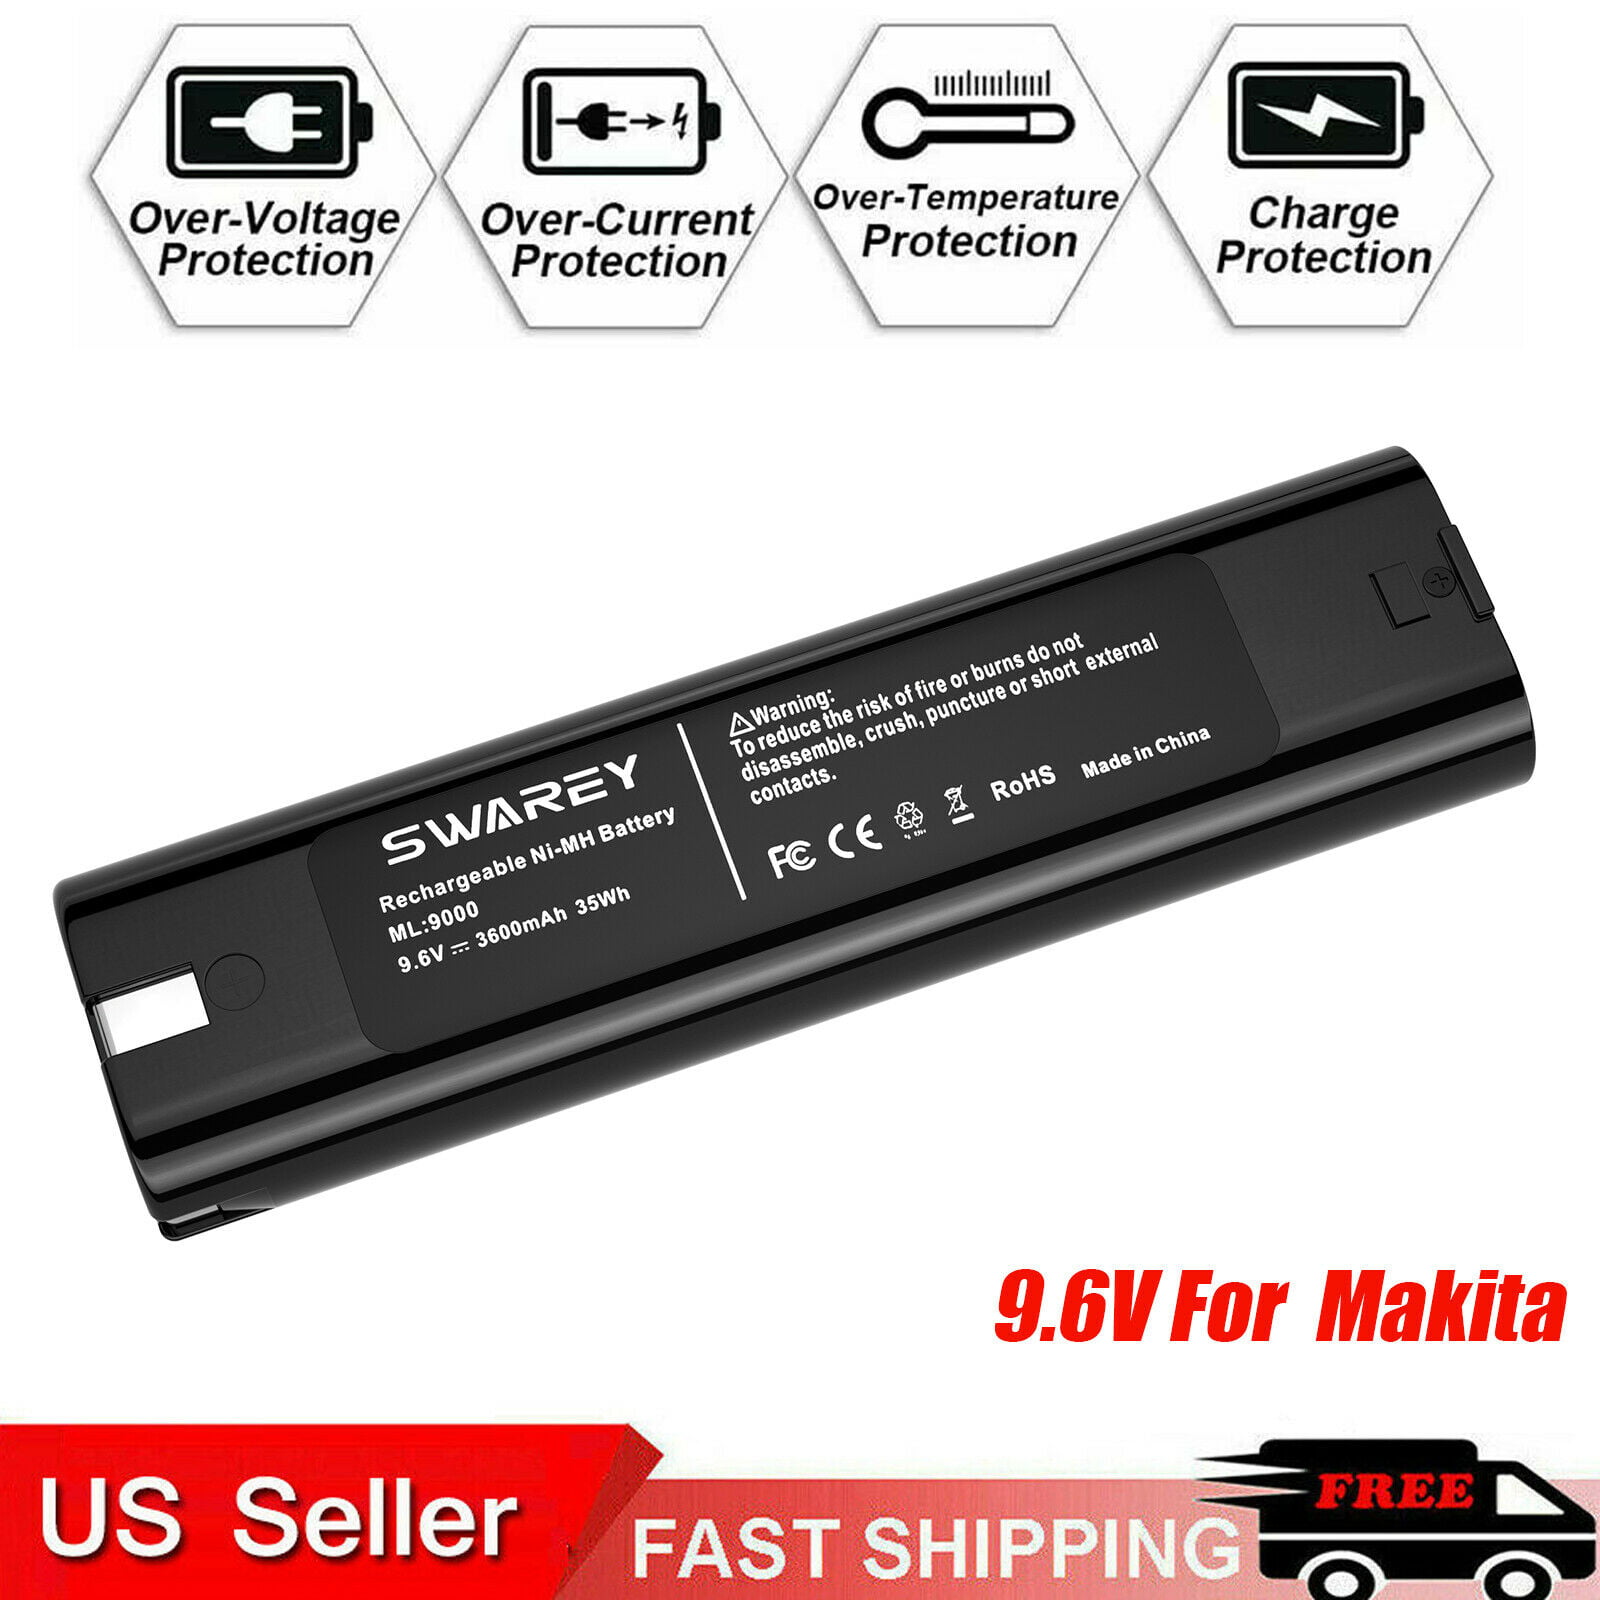 2Pack Replacement for Makita 9.6V 3.6Ah Battery 9000 9001 9002 9033 9600 193890-9 192696-2 632007-4 